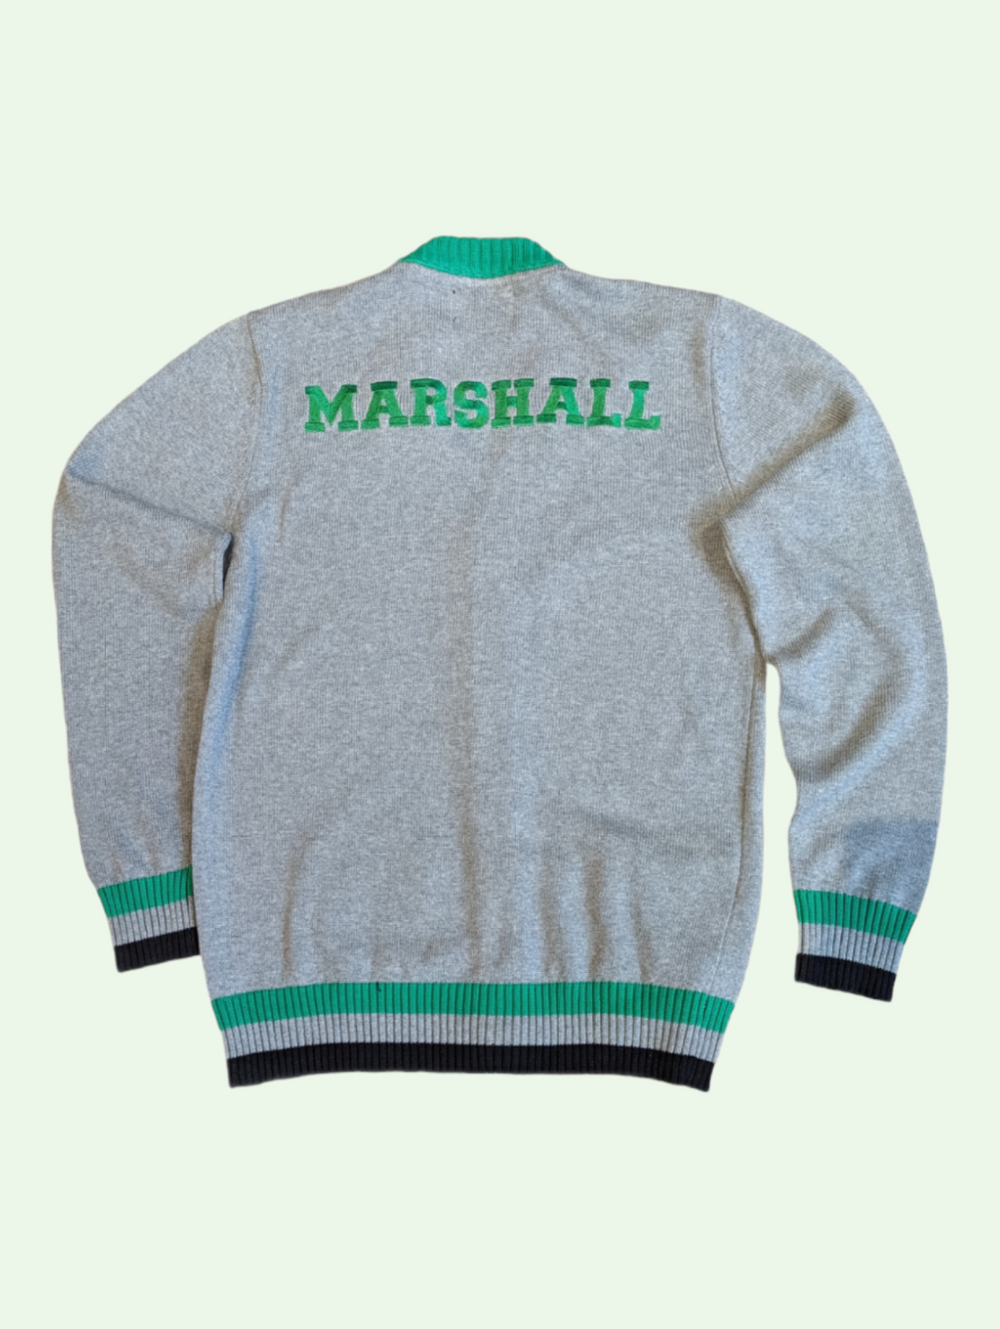 the back of the cardigan showing an embroidred "marshall" across the shoulders